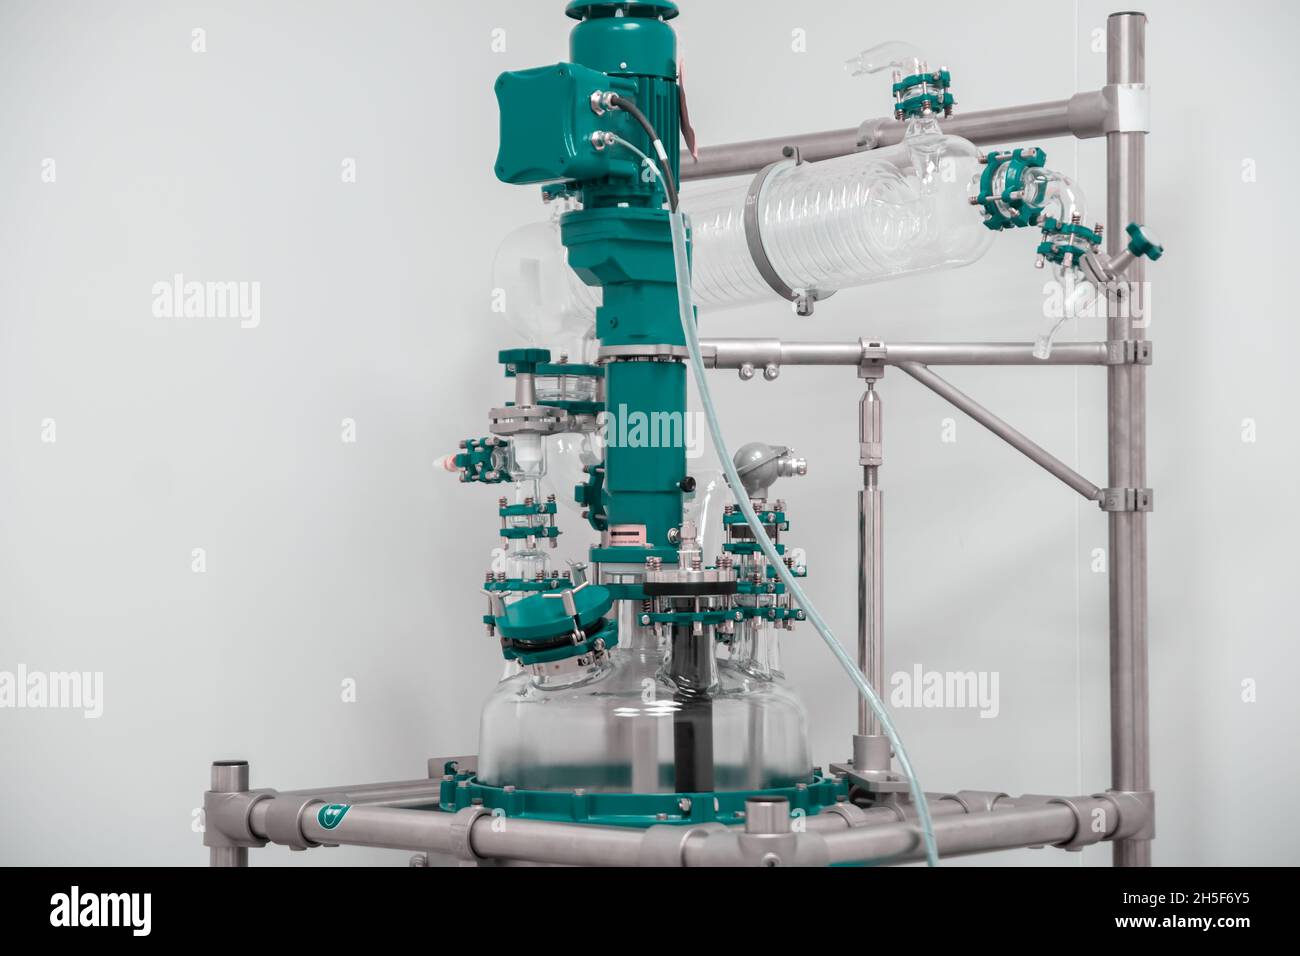 Small volume chemical reactor. Multitask pilot reactor for semi-industrial production. Stock Photo